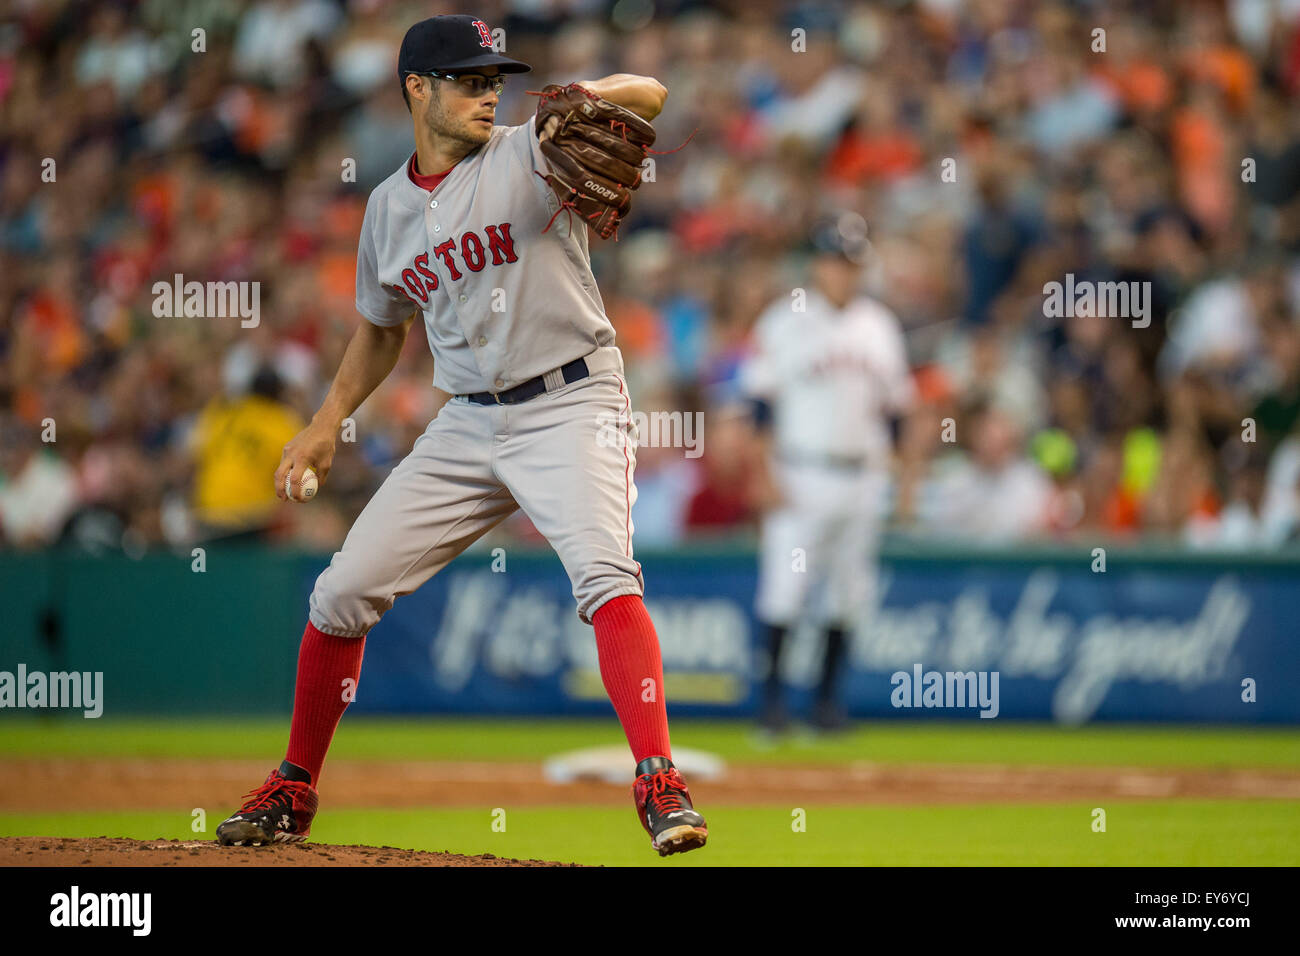 Houston, TX, USA. 22nd July, 2015. Boston Red Sox starting pitcher Joe Kelly (56) pitches during the 2nd inning of a Major League Baseball game between the Houston Astros and the Boston Red Sox at Minute Maid Park in Houston, TX. Trask Smith/CSM/Alamy Live News Stock Photo